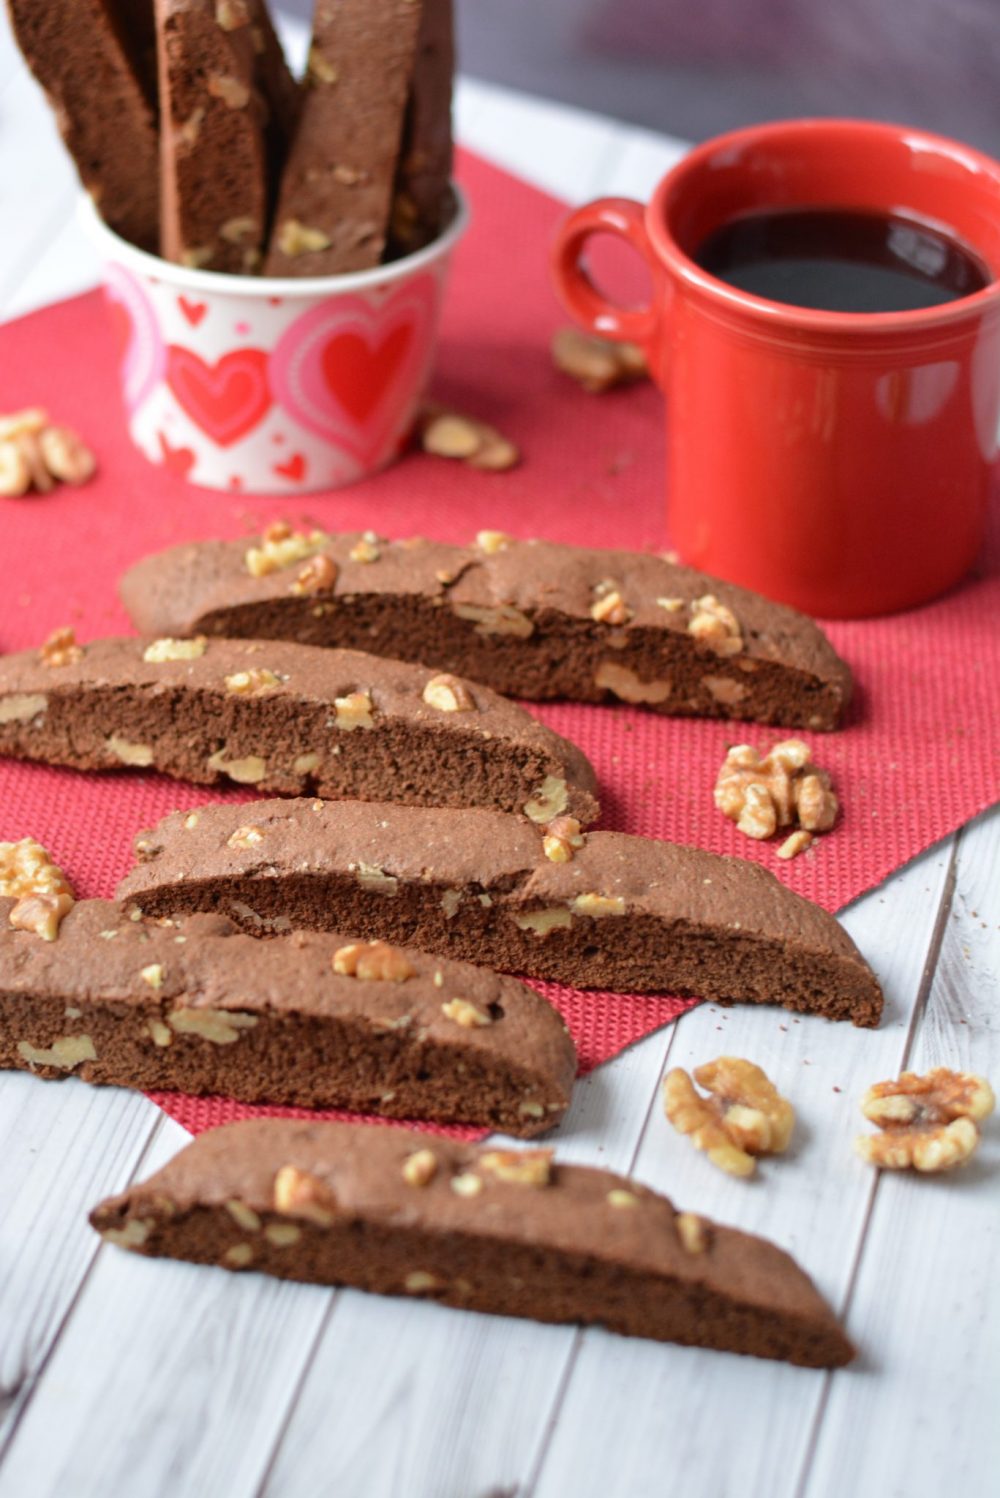 Chocolate Walnut Biscotti laid out on a red napkin